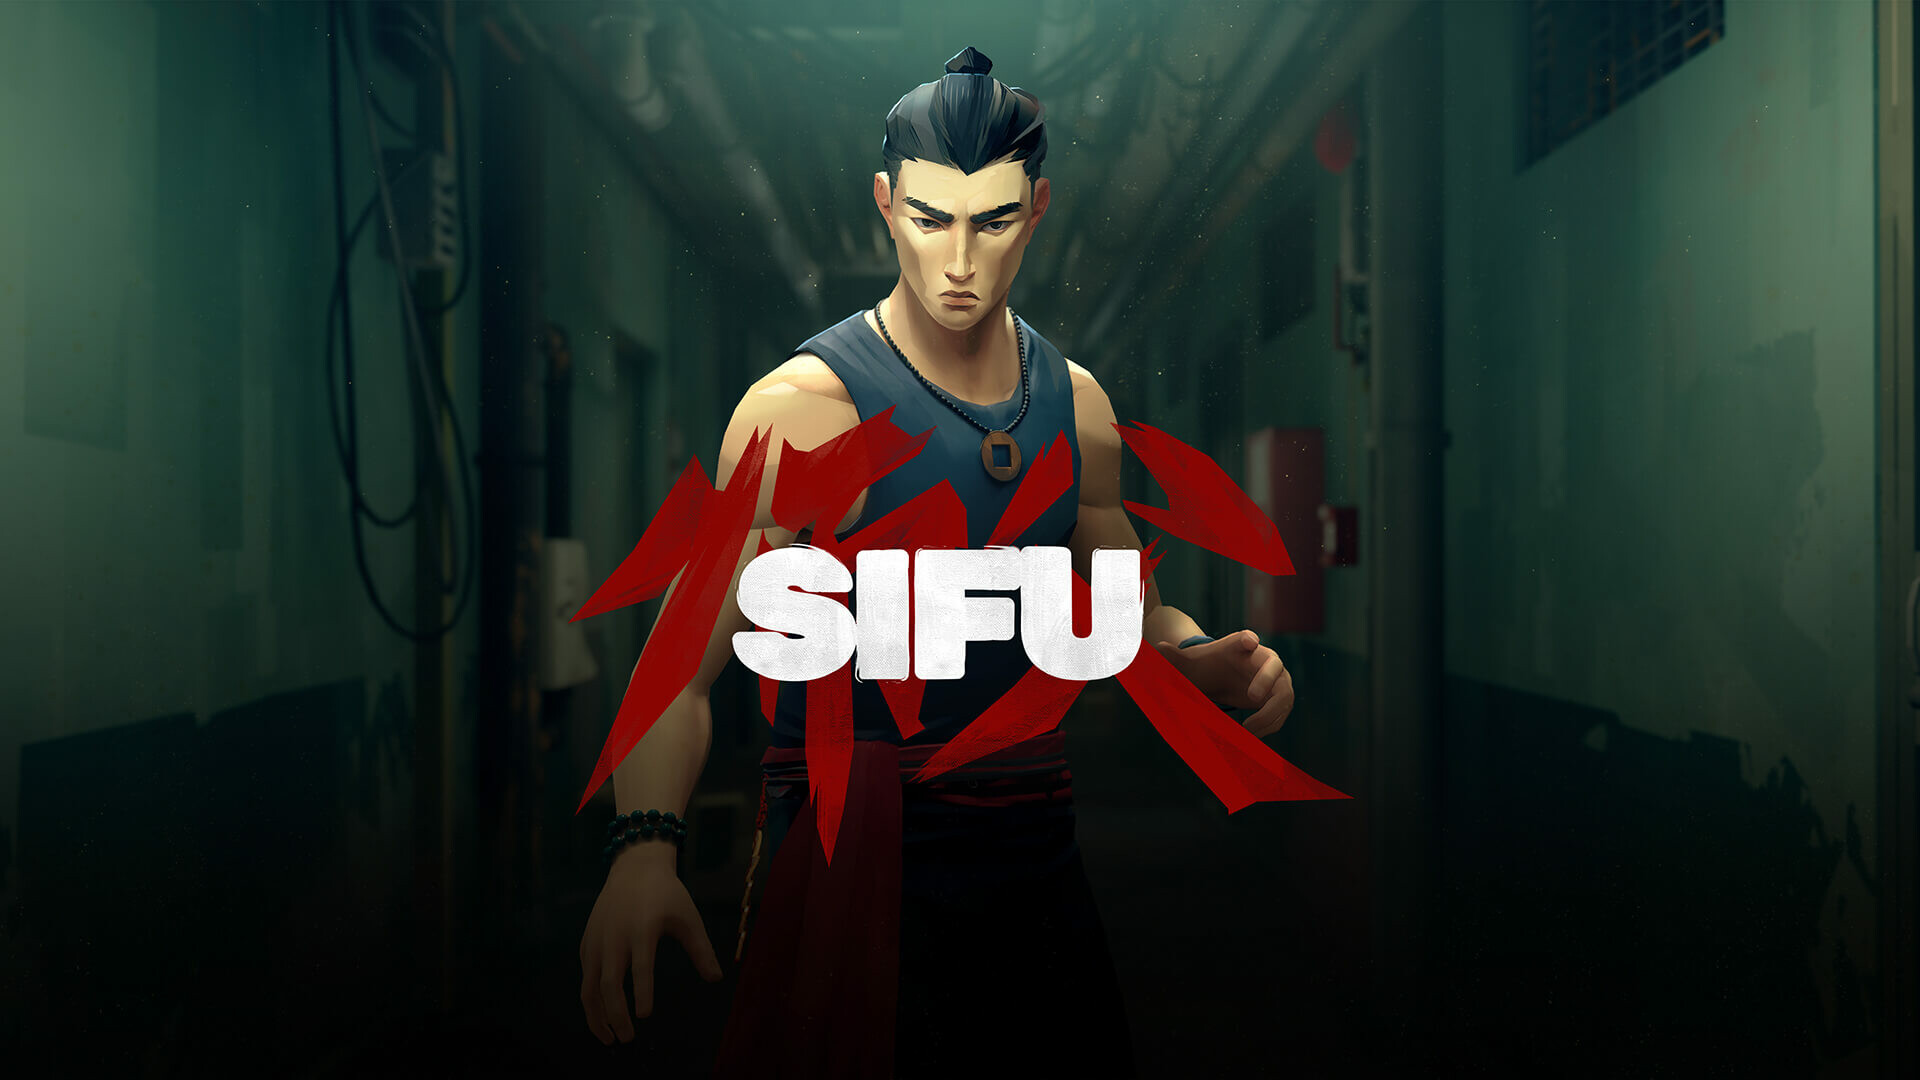 Sifu: The players can visit a kung fu school to practice their skills in between levels. 1920x1080 Full HD Wallpaper.